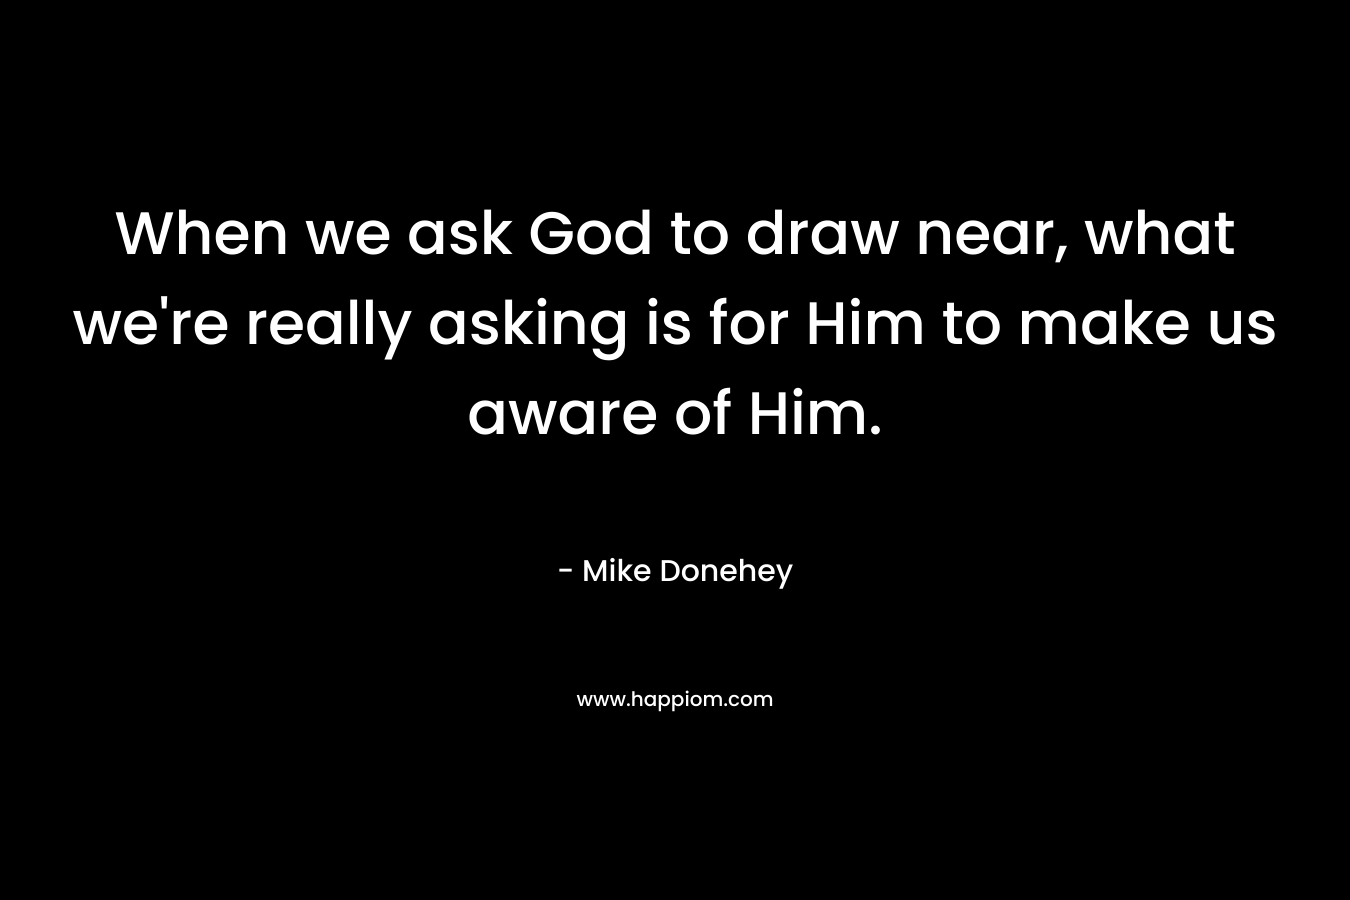 When we ask God to draw near, what we're really asking is for Him to make us aware of Him.